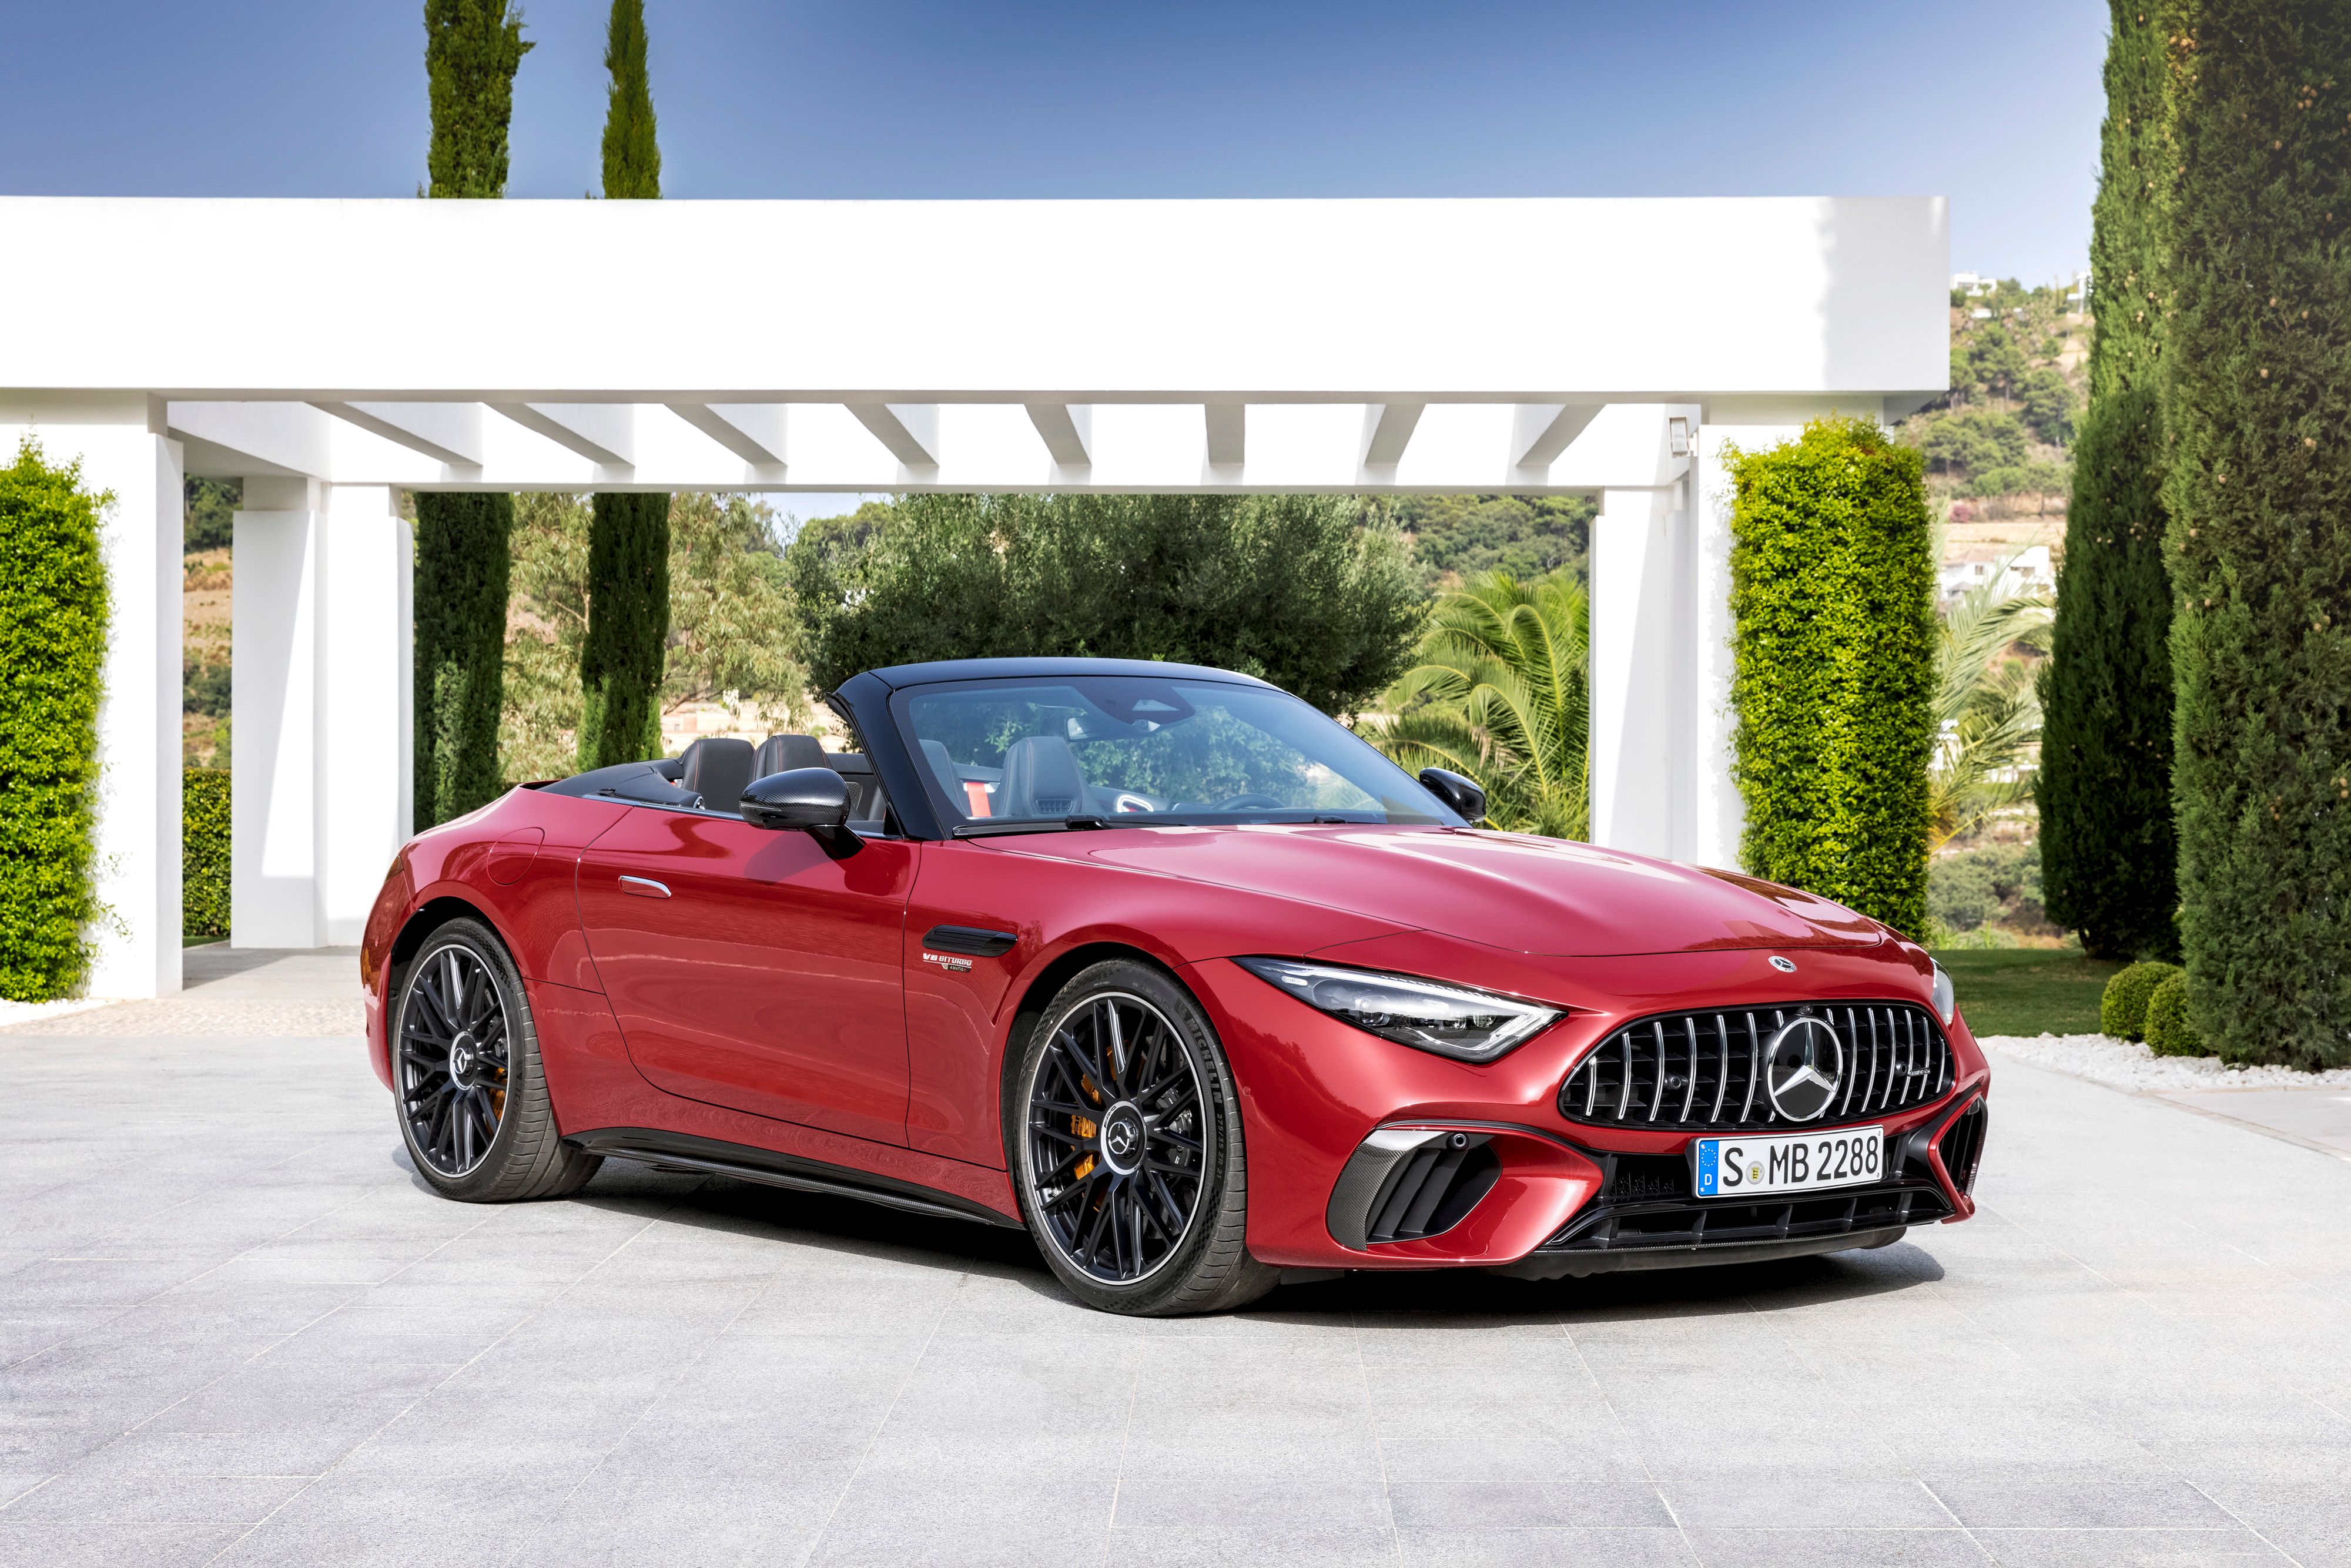 The 2023 MercedesAMG SL Debuts With AMG Styling, Sporty Interior, And A V8 Engine